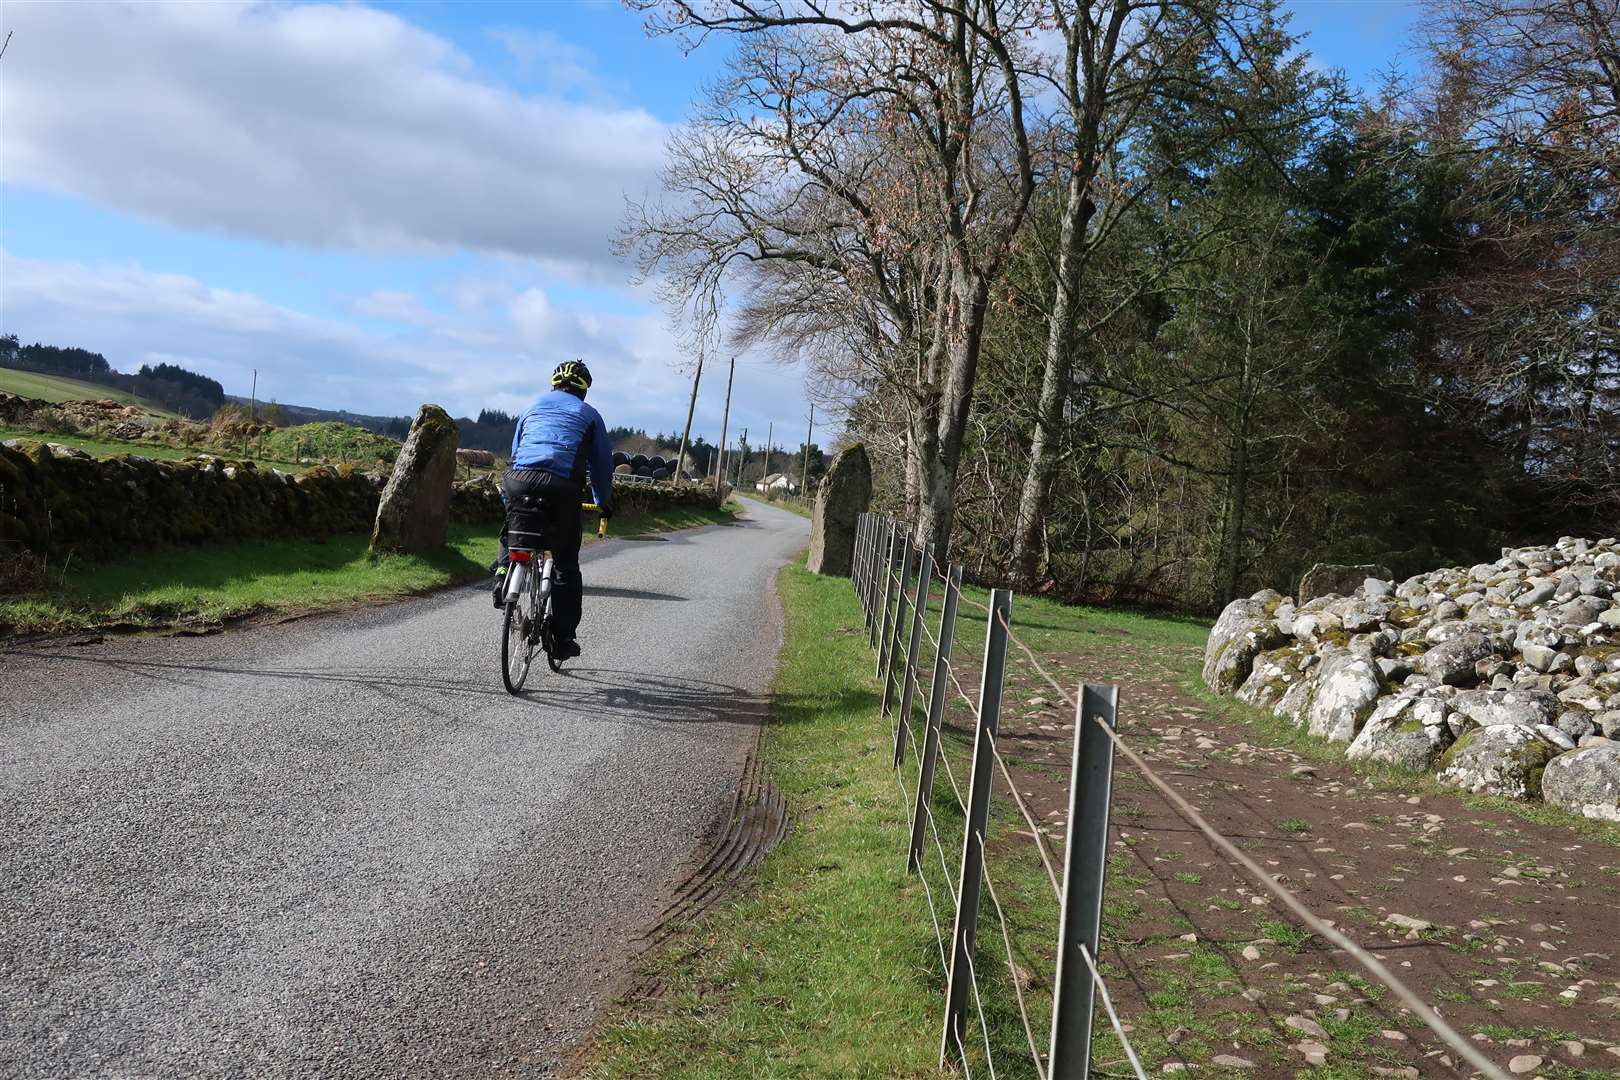 It's still OK to get out on the bike and enjoy the countryside and fresh air.